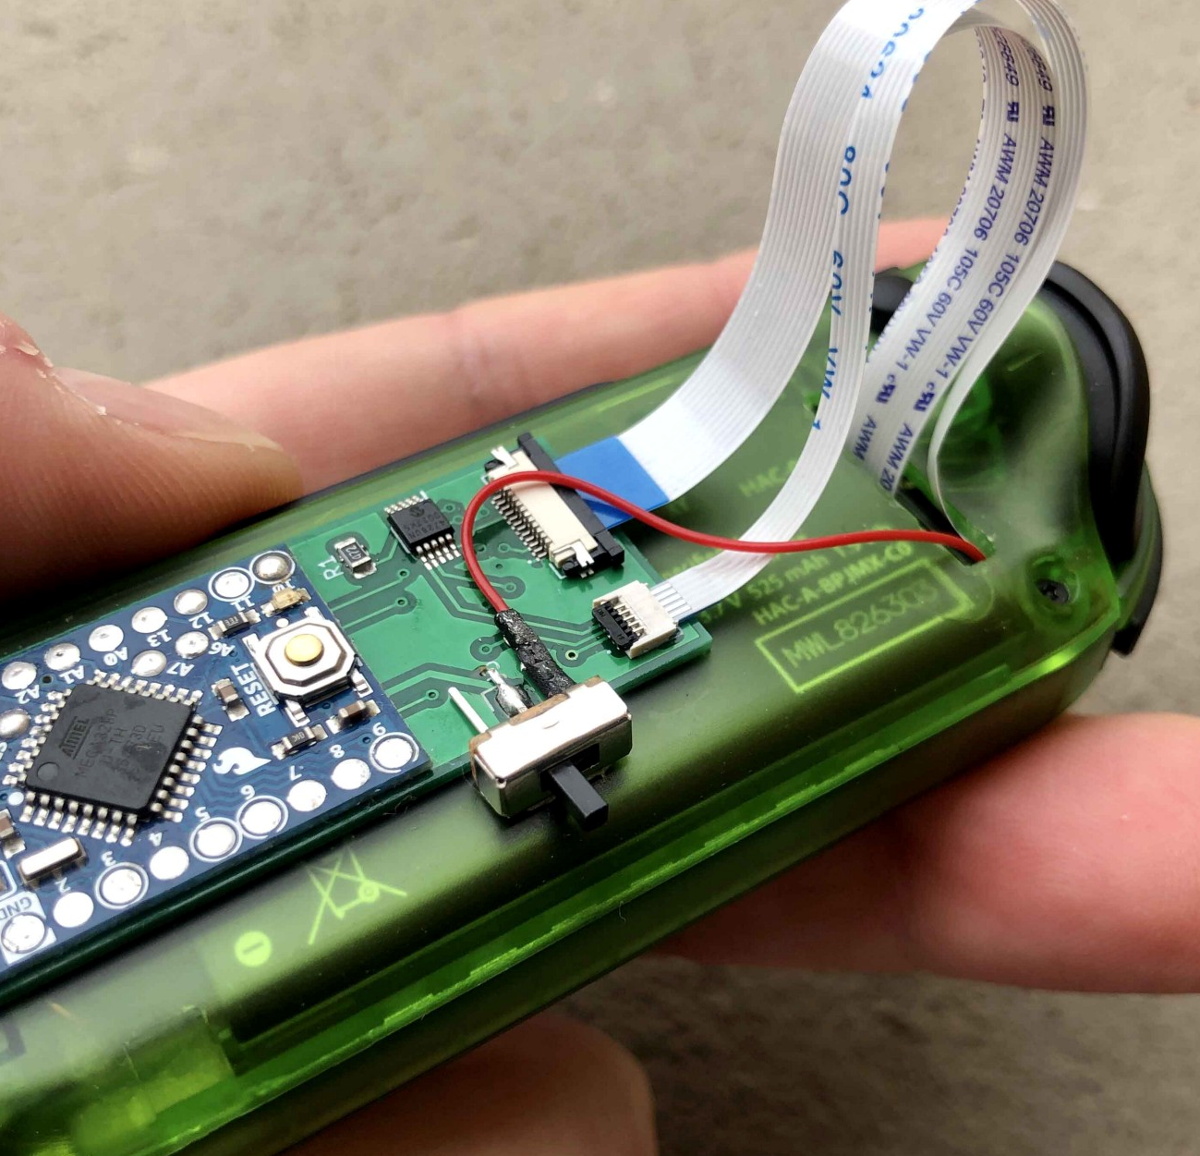 Joy Con Mod Gives Nintendo Switch Touchpad Control Hackaday